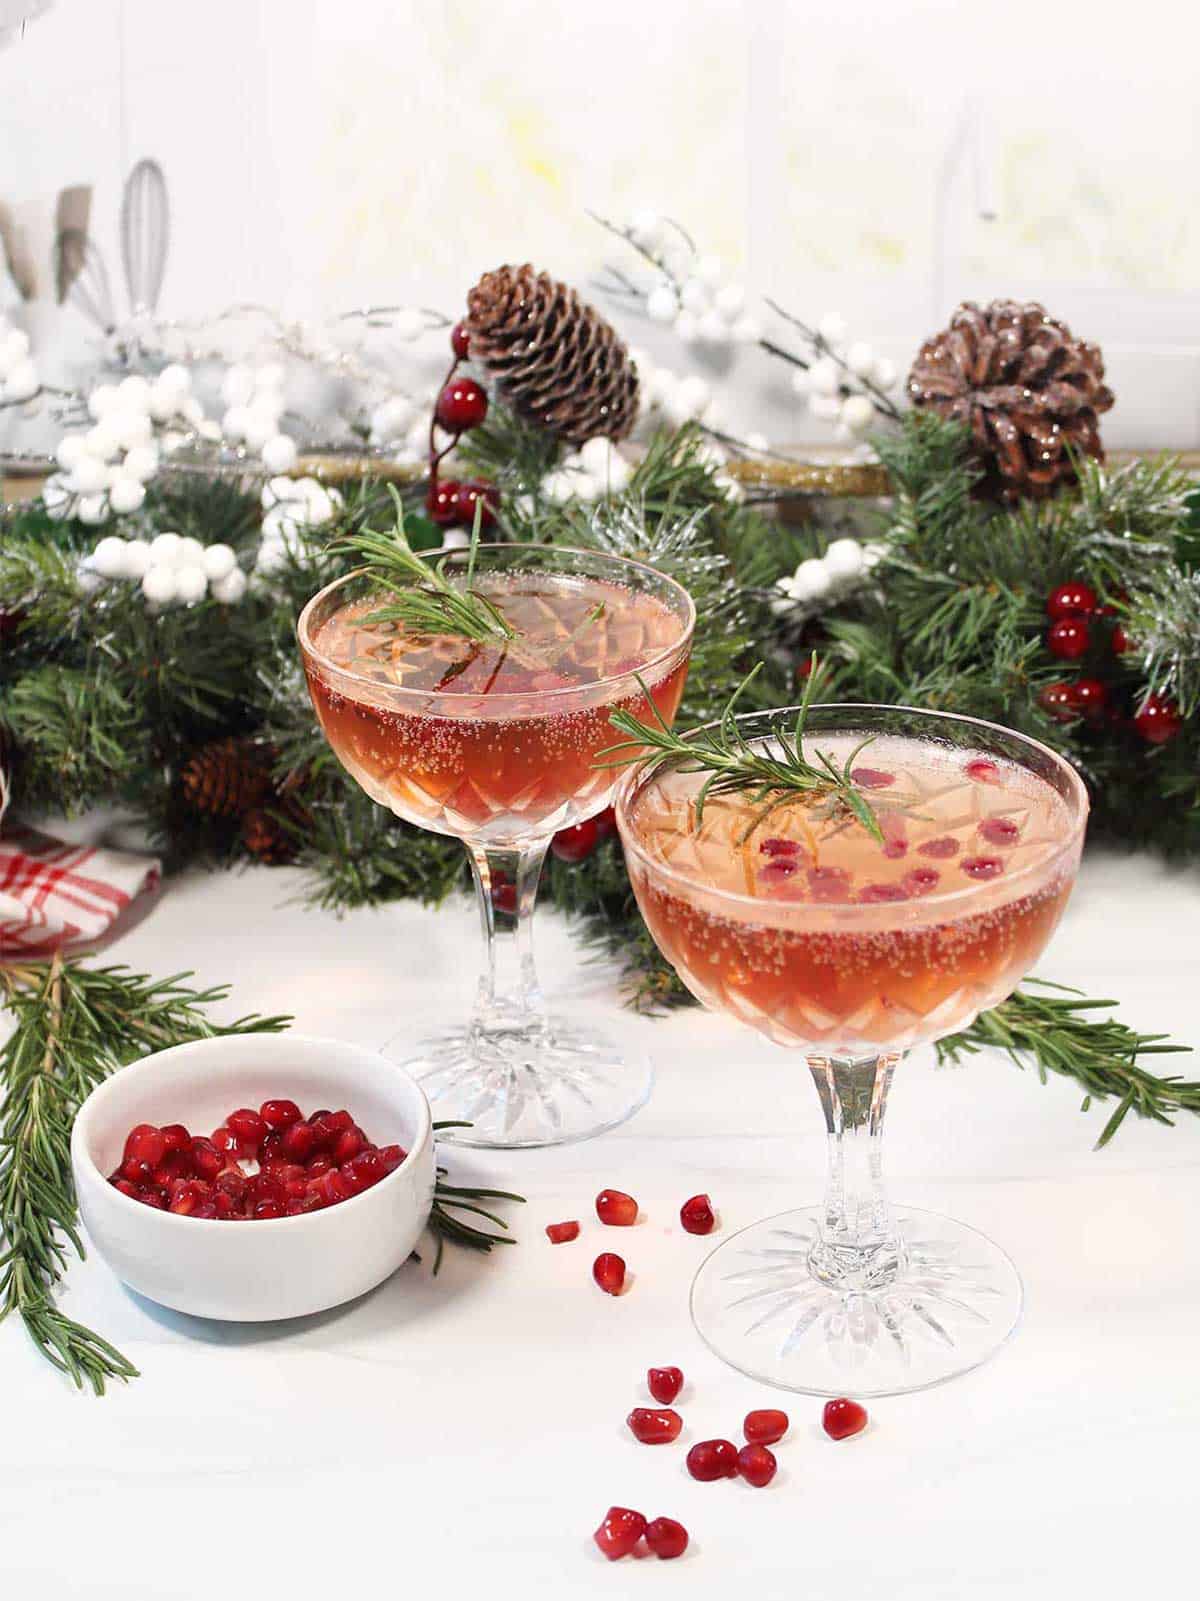 Two sparkling cocktails with garnishes.